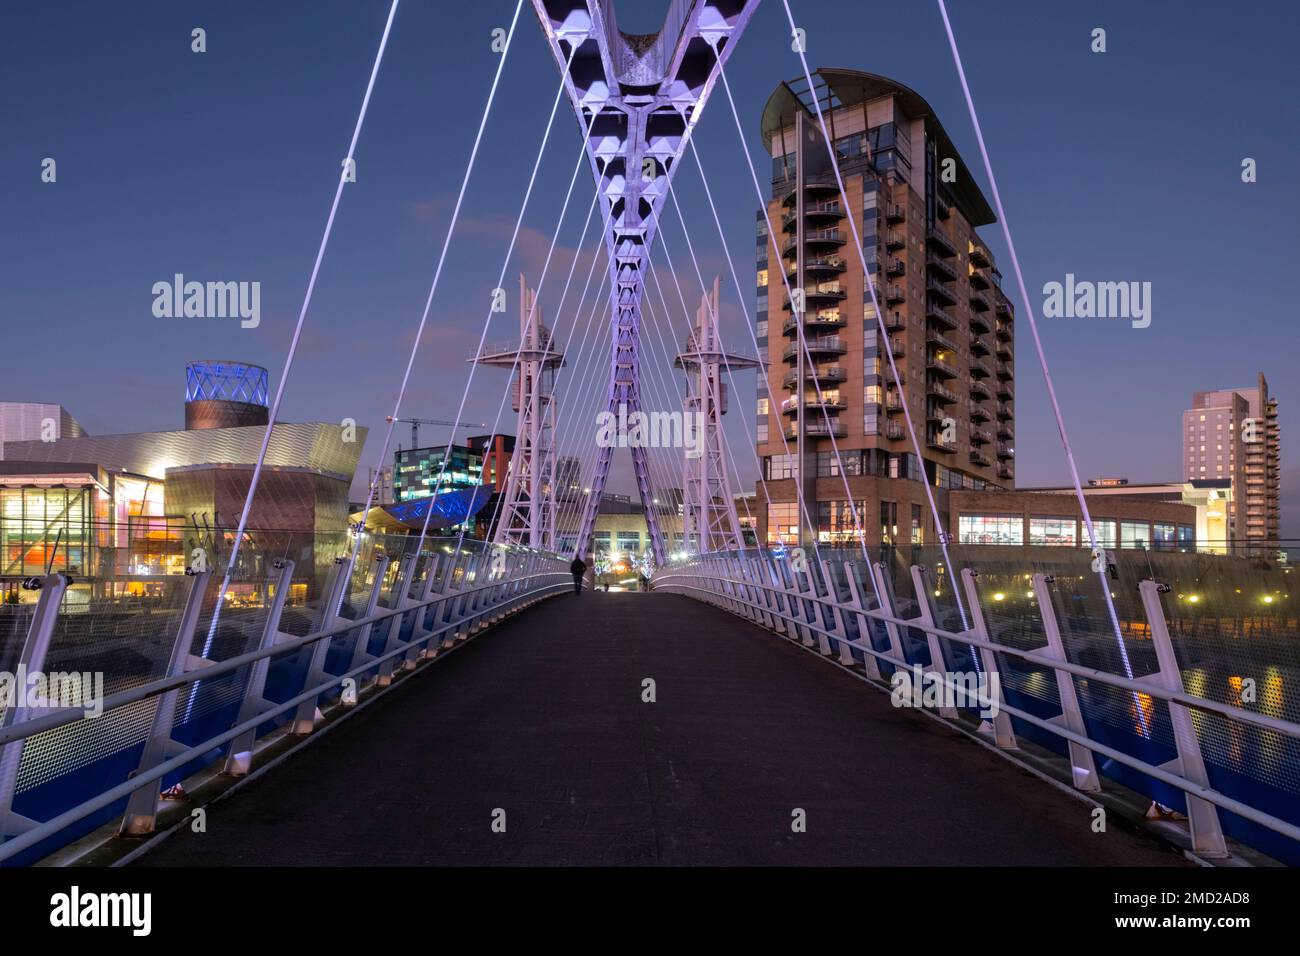 The Lowry Footbridge at night, Salford Quays, Salford, Manchester, England, UK Stock Photo